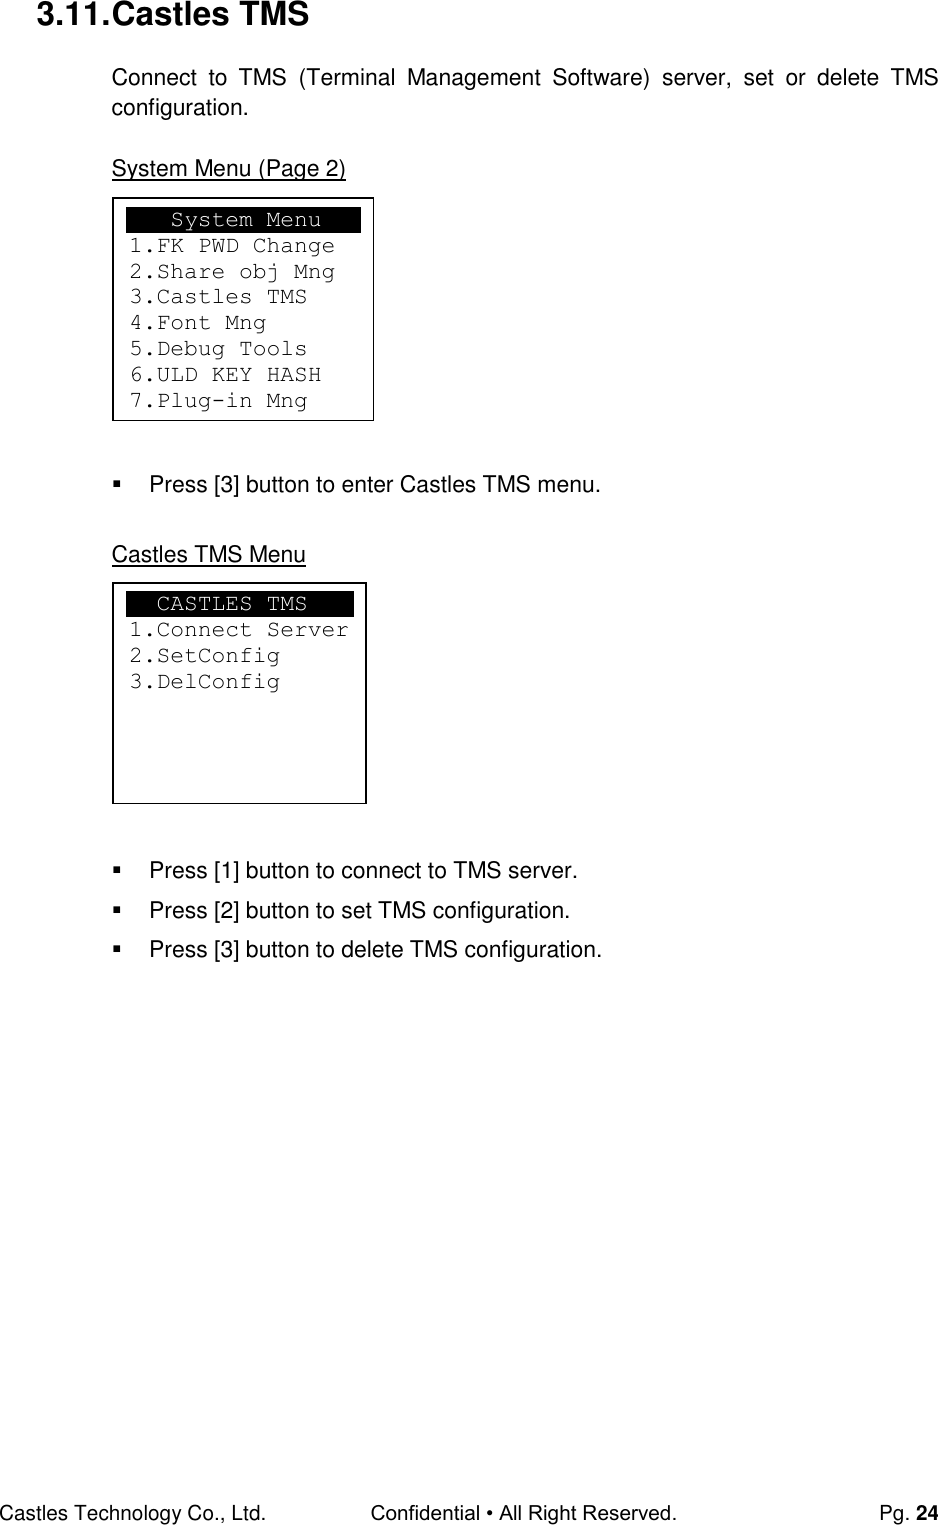 Castles Technology Co., Ltd. Confidential • All Right Reserved.  Pg. 24 3.11. Castles TMS Connect  to  TMS  (Terminal  Management  Software)  server,  set  or  delete  TMS configuration.  System Menu (Page 2)          Press [3] button to enter Castles TMS menu.  Castles TMS Menu          Press [1] button to connect to TMS server.   Press [2] button to set TMS configuration.   Press [3] button to delete TMS configuration.          CASTLES TMS 1.Connect Server 2.SetConfig 3.DelConfig      System Menu 1.FK PWD Change 2.Share obj Mng 3.Castles TMS 4.Font Mng 5.Debug Tools 6.ULD KEY HASH 7.Plug-in Mng  